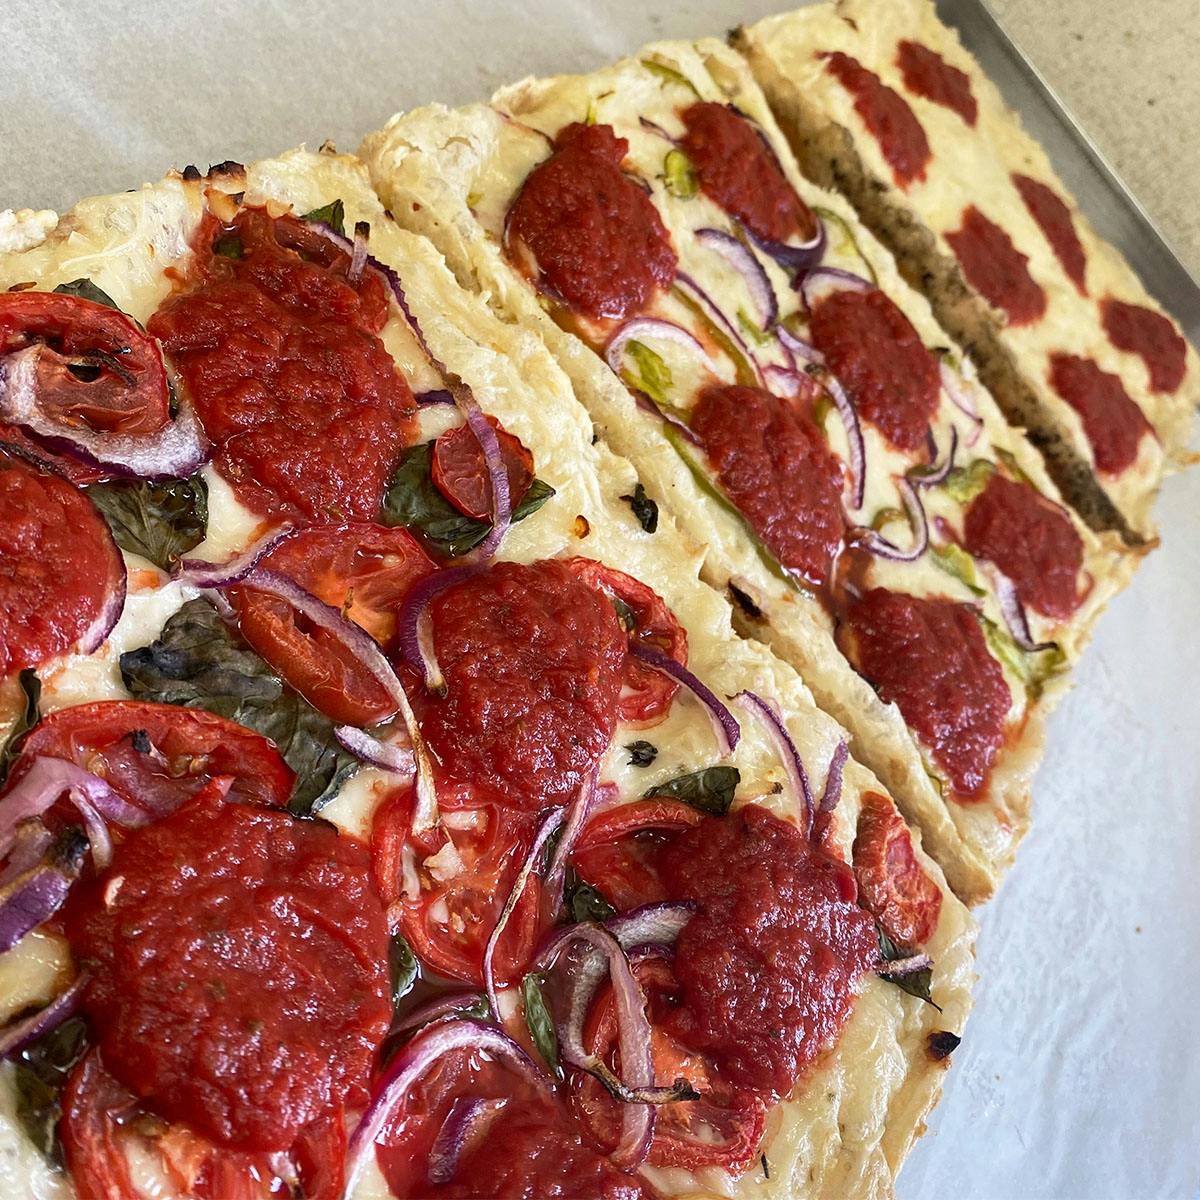 Detroit Style Pizza Company—Ship Nationwide!